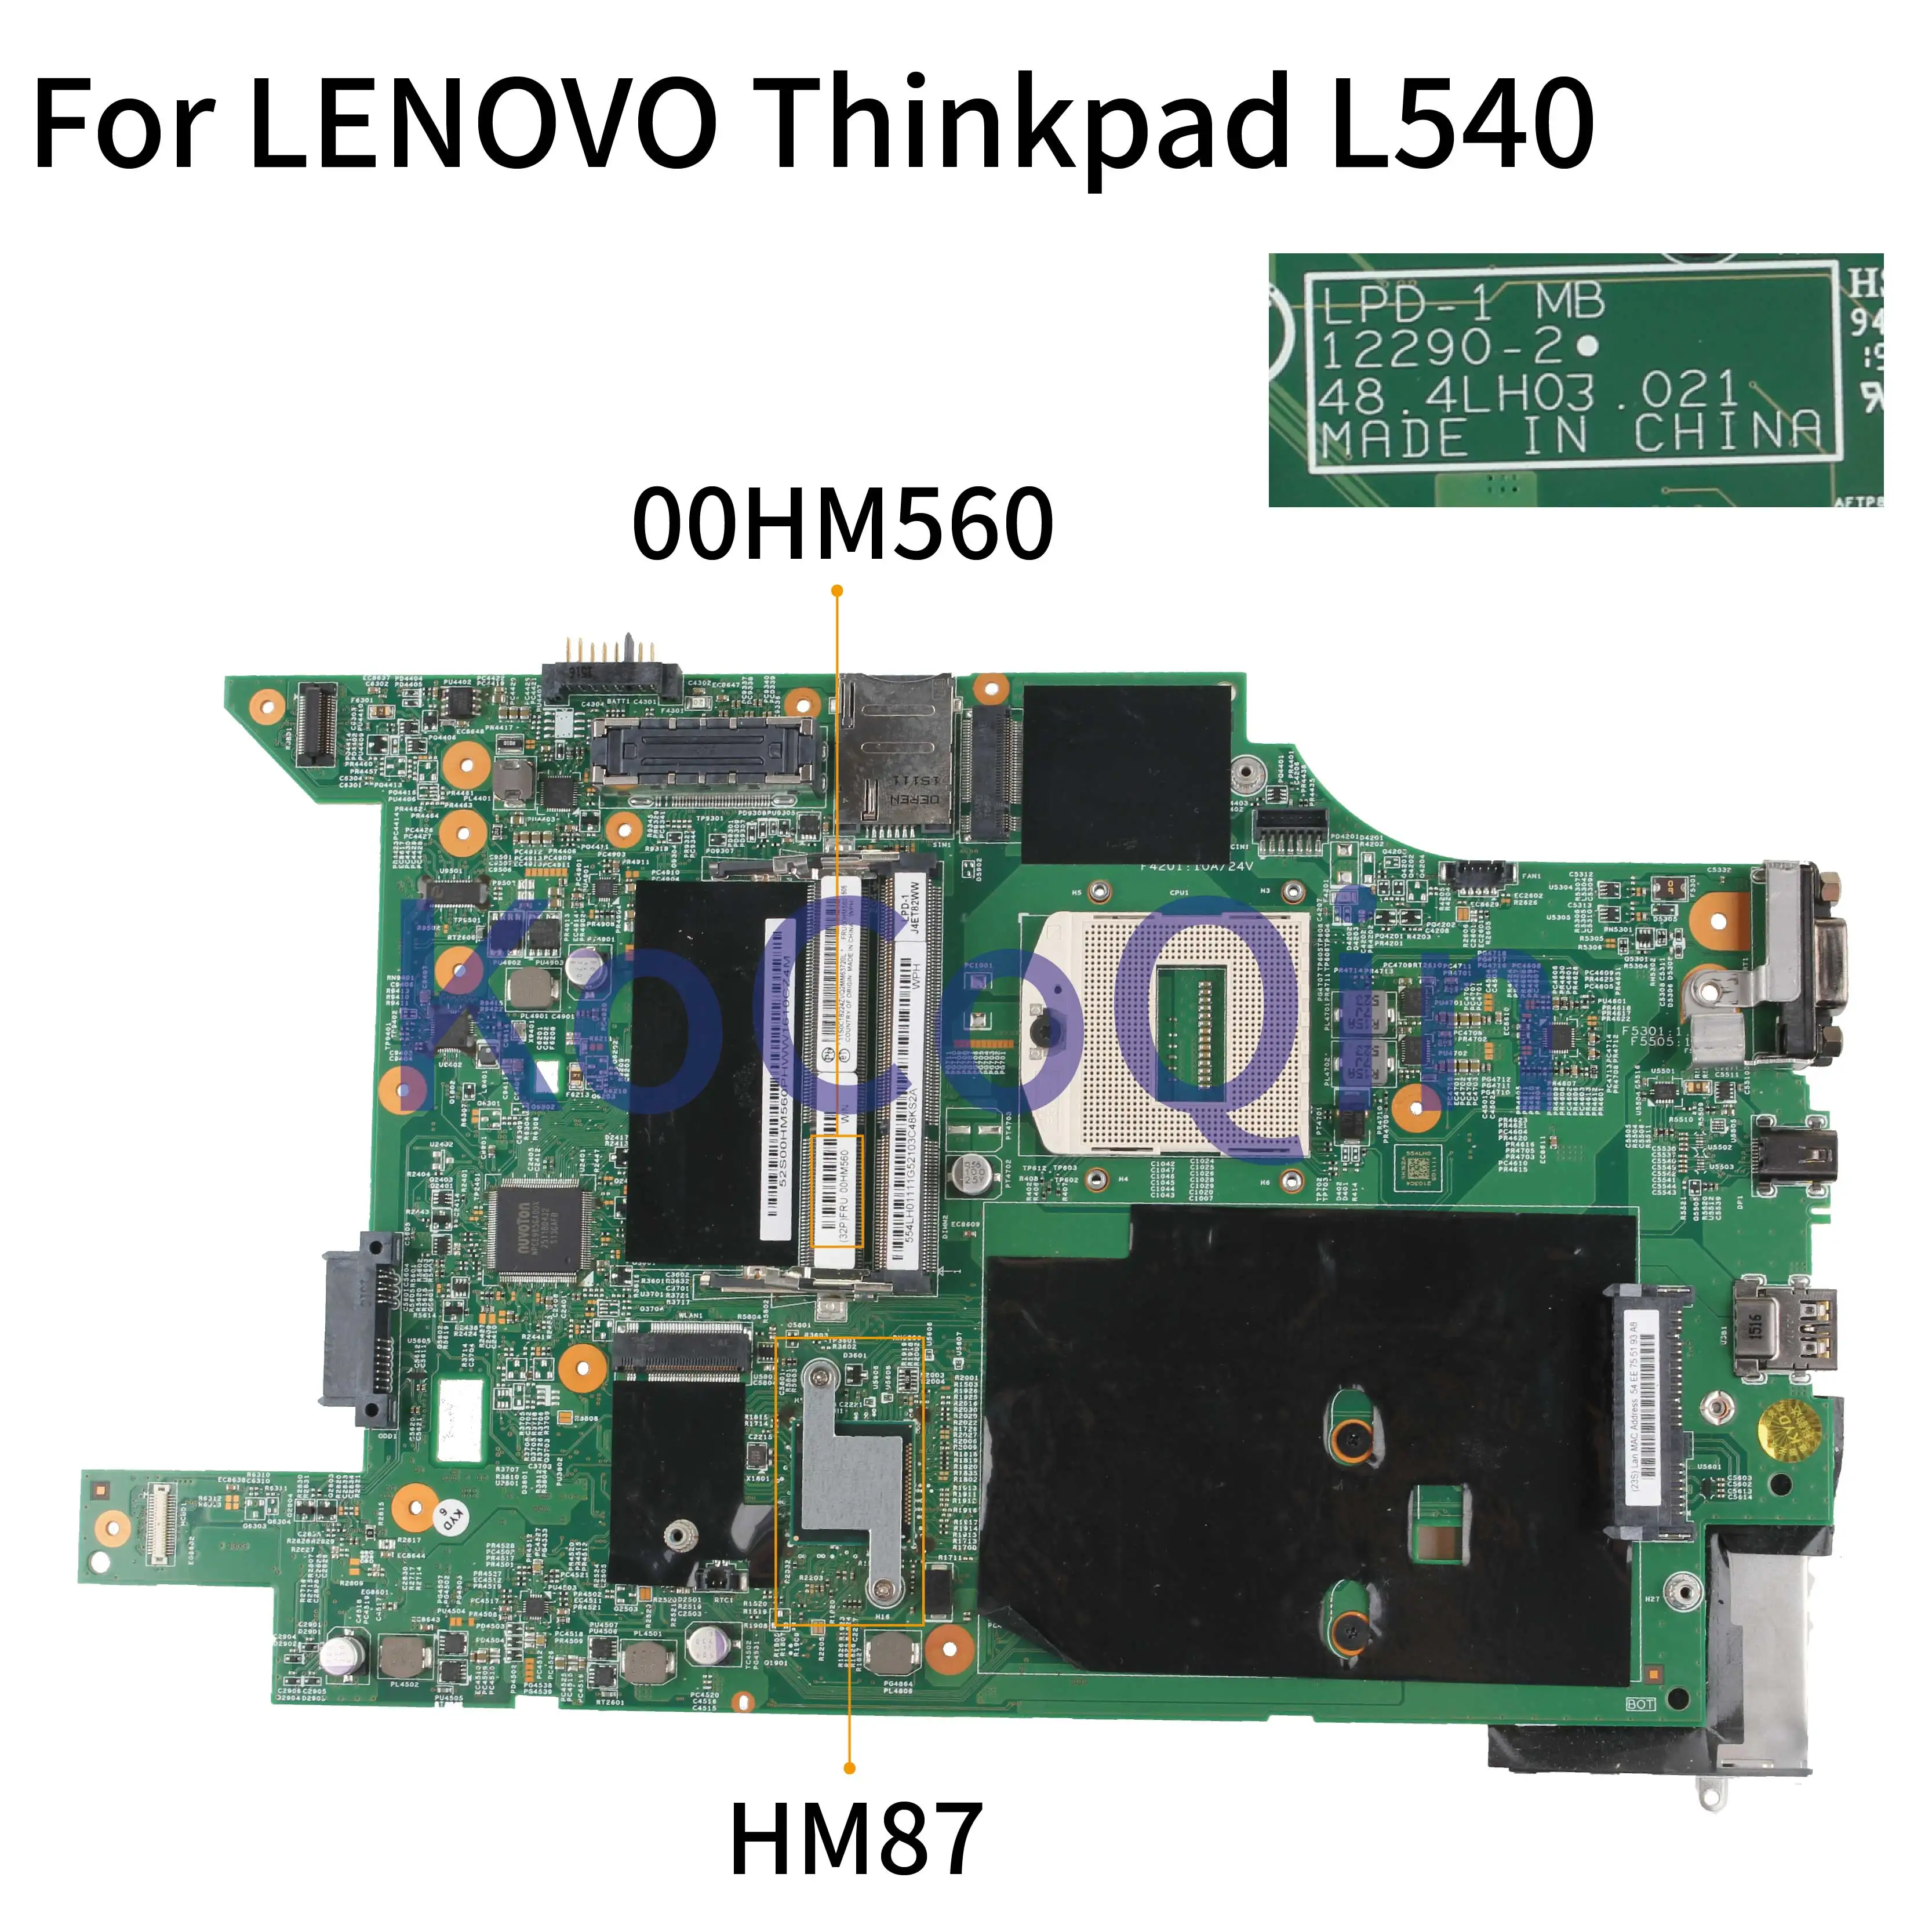 KoCoQin Laptop motherboard For LENOVO Thinkpad L540 Mainboard 00HM562 04X2034 04X2032 00HM560 12290-2 48.4LH03.021 HM86